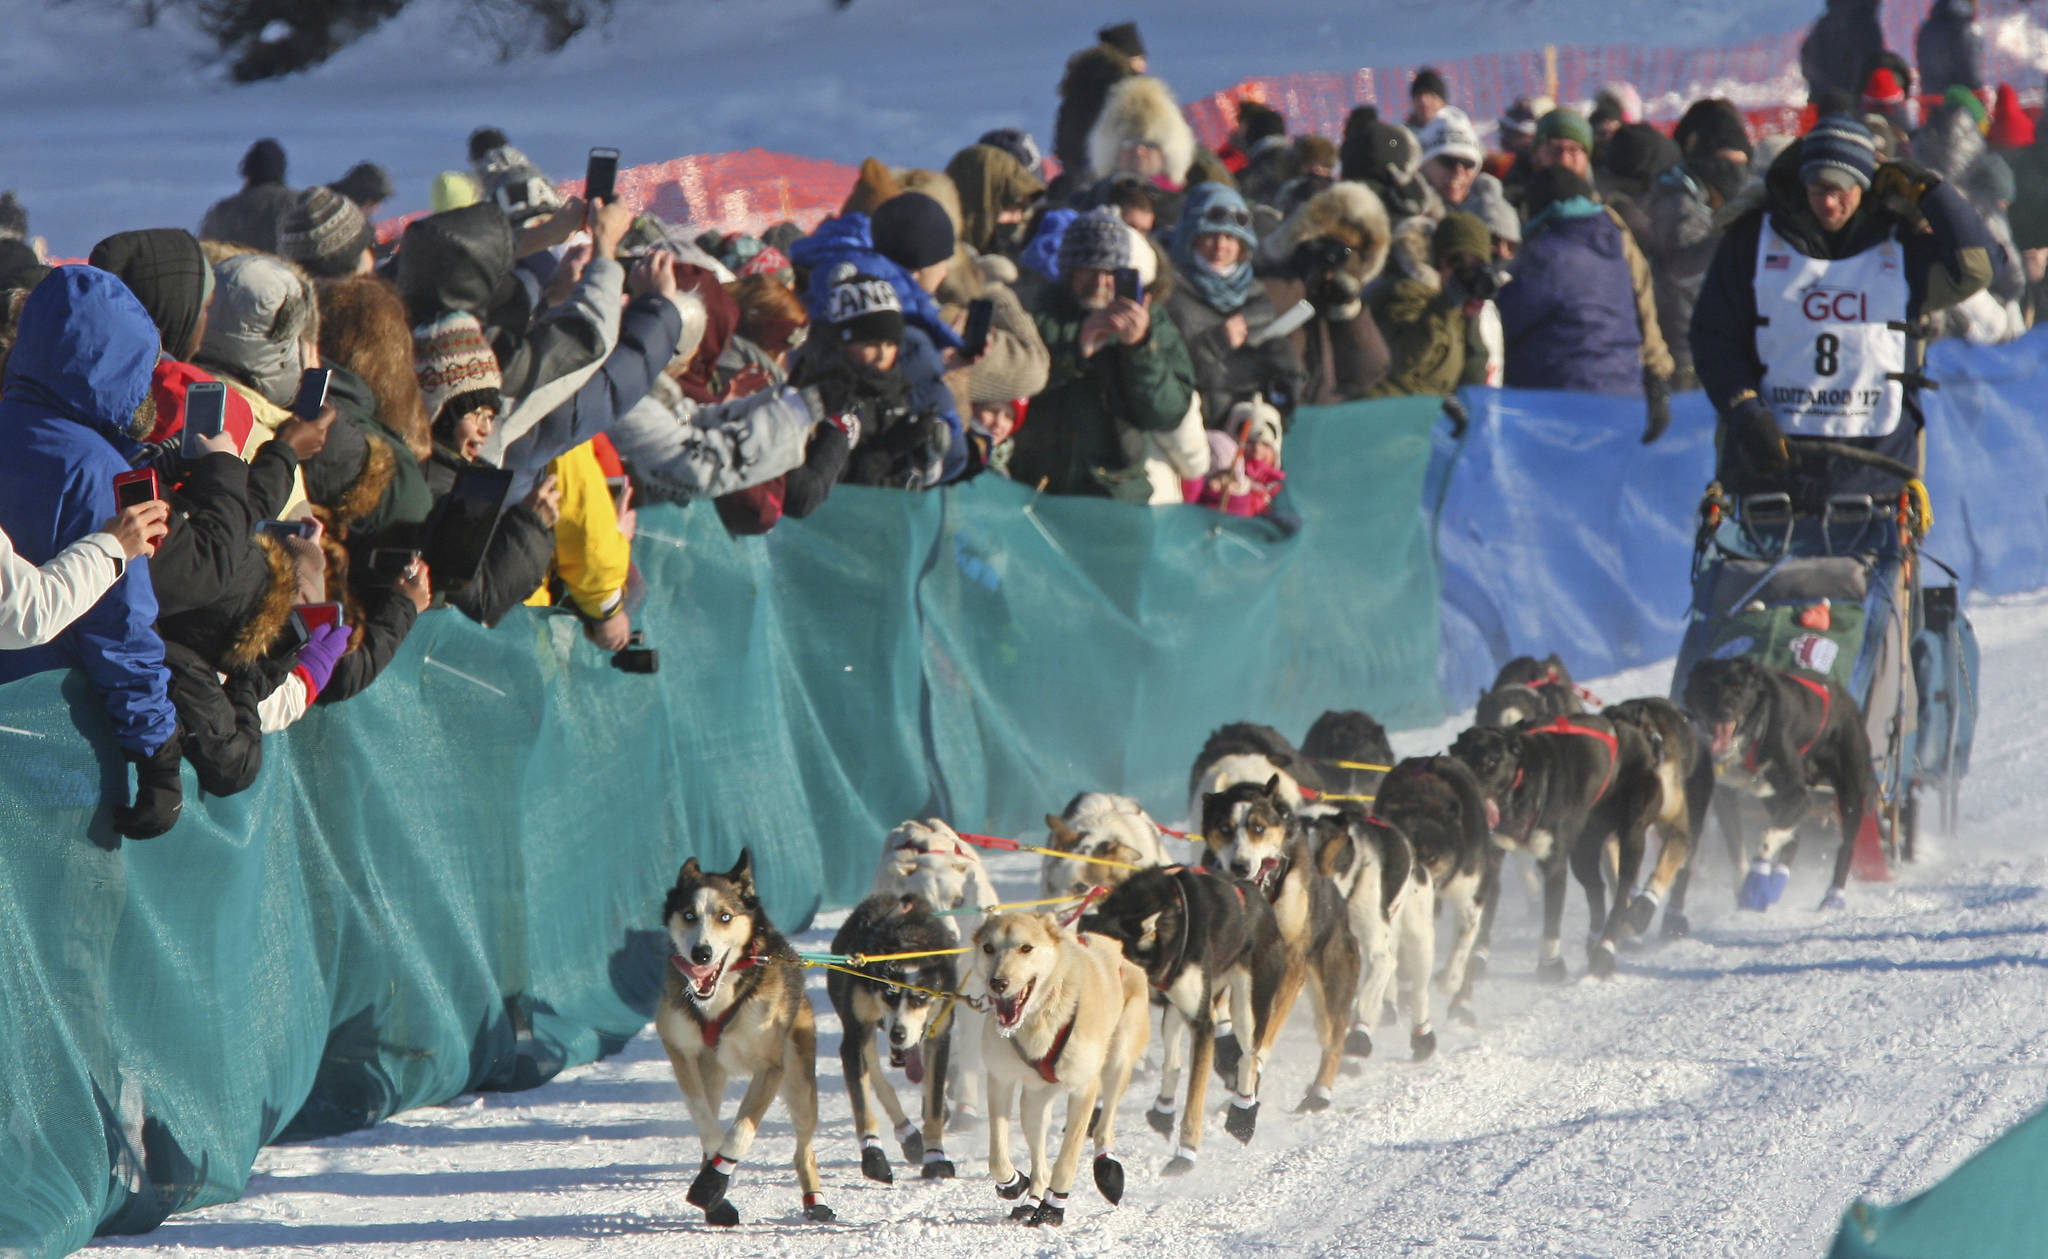 Race rookie Ryan Anderson of Minnesota drives his team onto the Chena River during the restart of the Iditarod Trail Sled Dog Race in front of Pike’s Waterfront Lodge, Monday, March 6, 2017 in Fairbanks. It’s the third time the starting location of the 1,000-mile trek to Nome, Alaska has been moved from Anchorage to Fairbanks due to low snow and poor trail conditions south of and through the Alaska Range. (Eric Engman | Fairbanks Daily News-Miner)